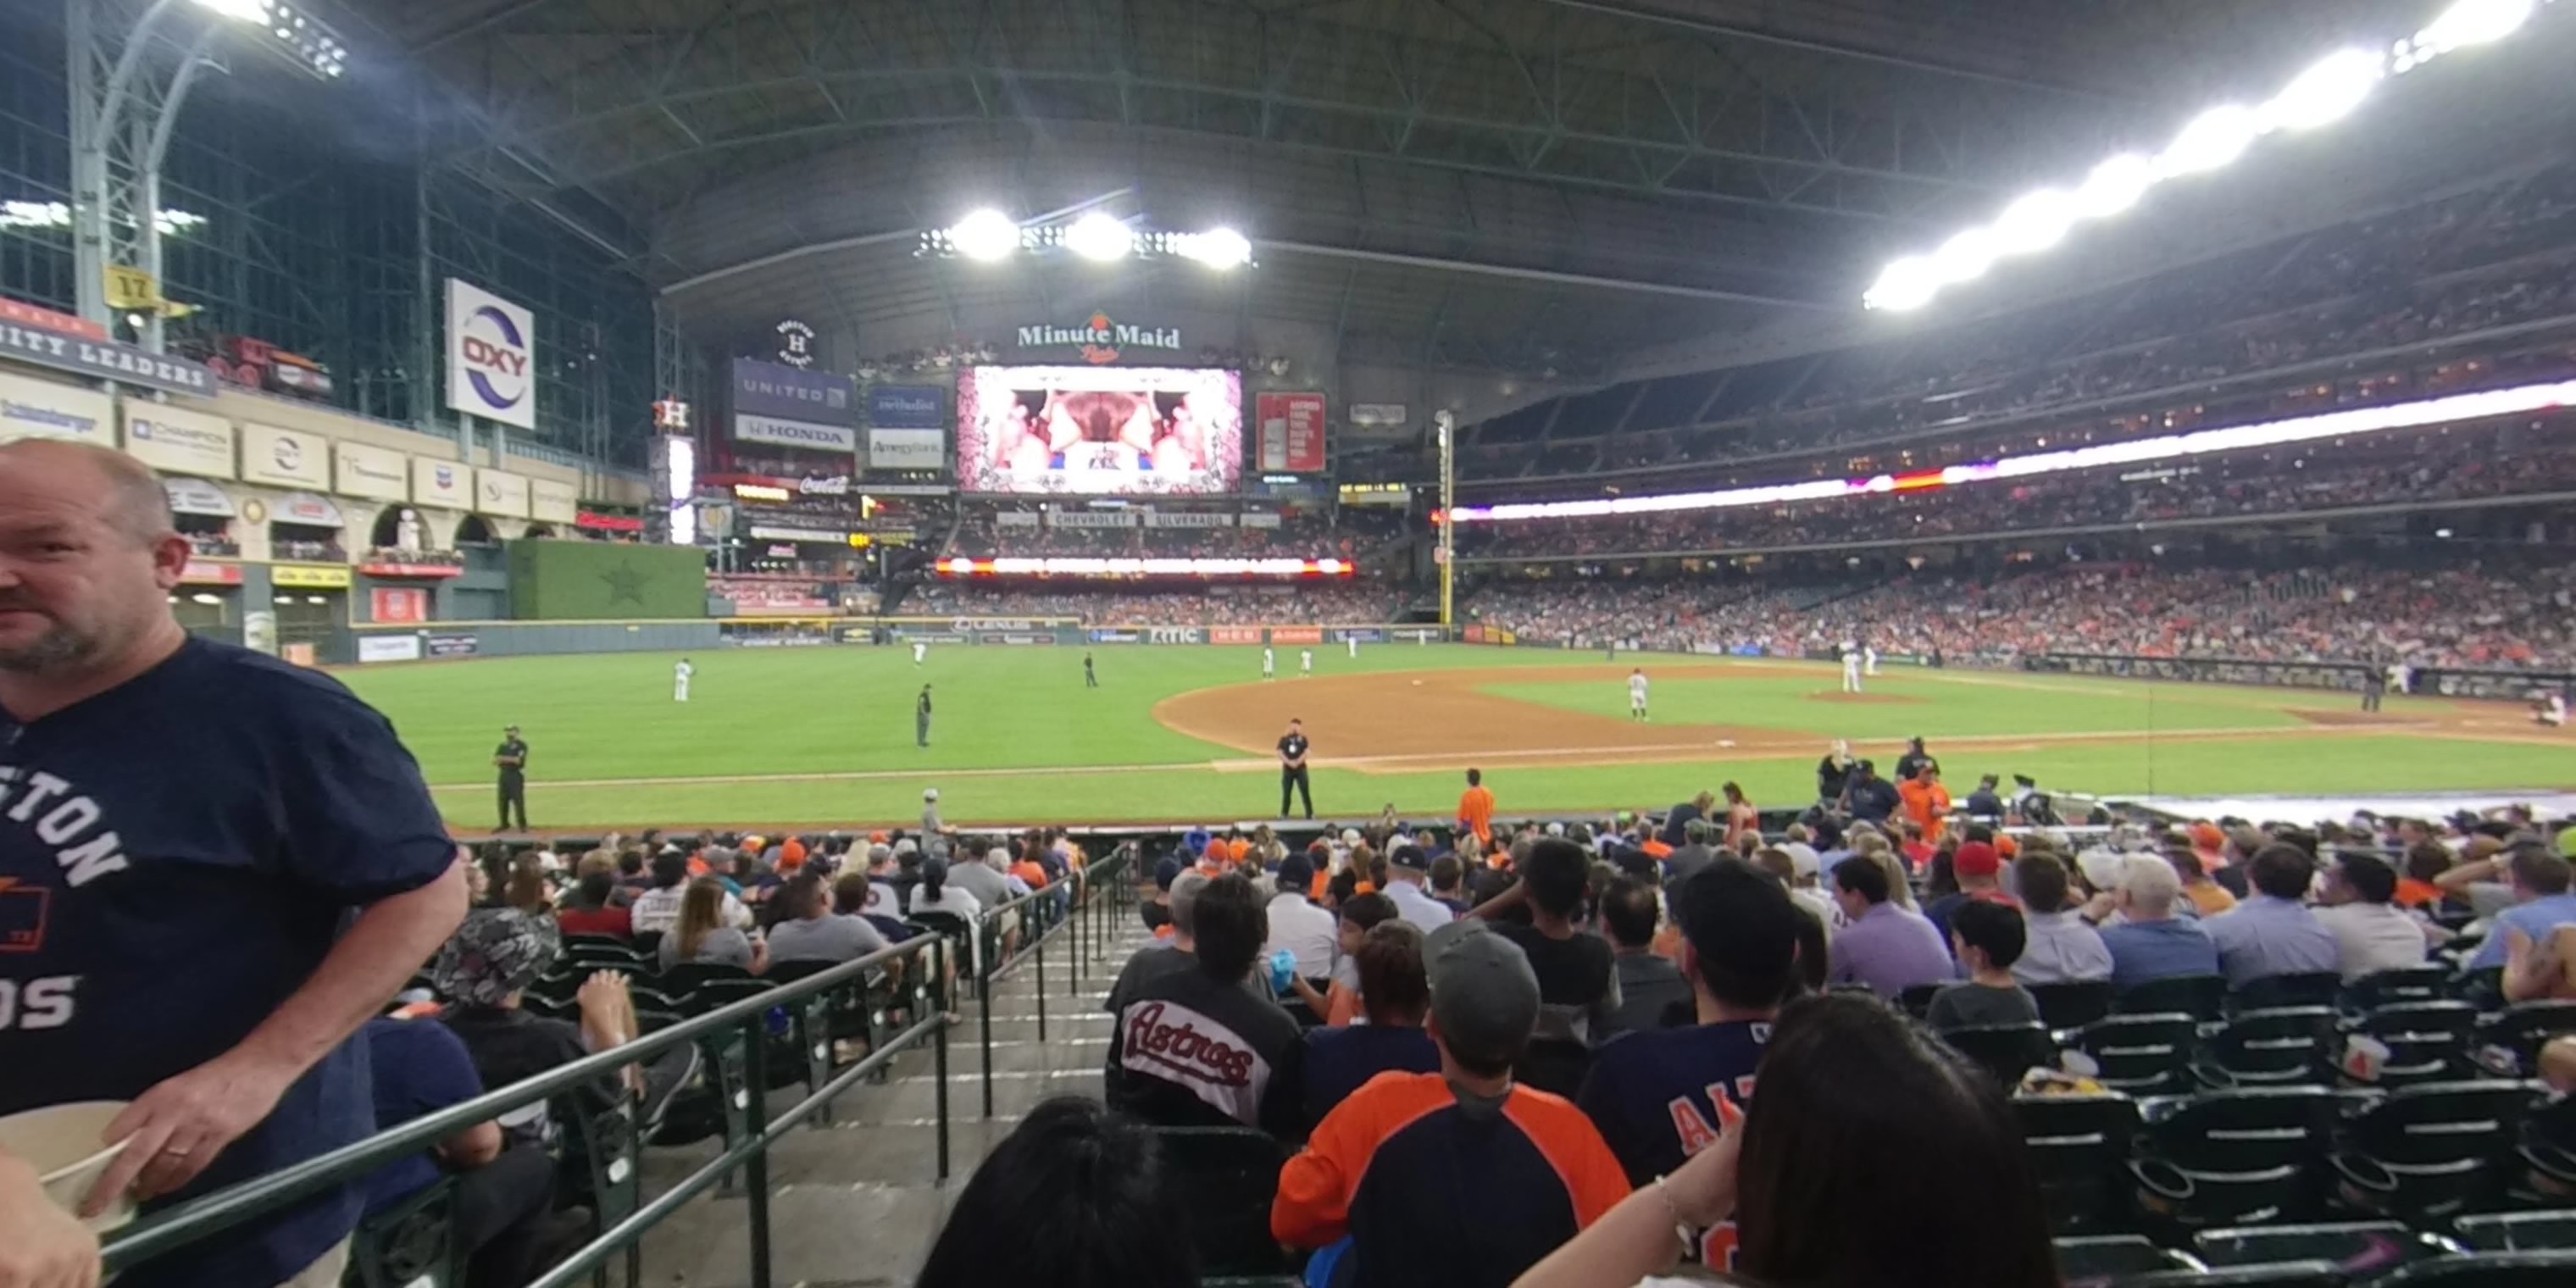 section 110 panoramic seat view  for baseball - minute maid park